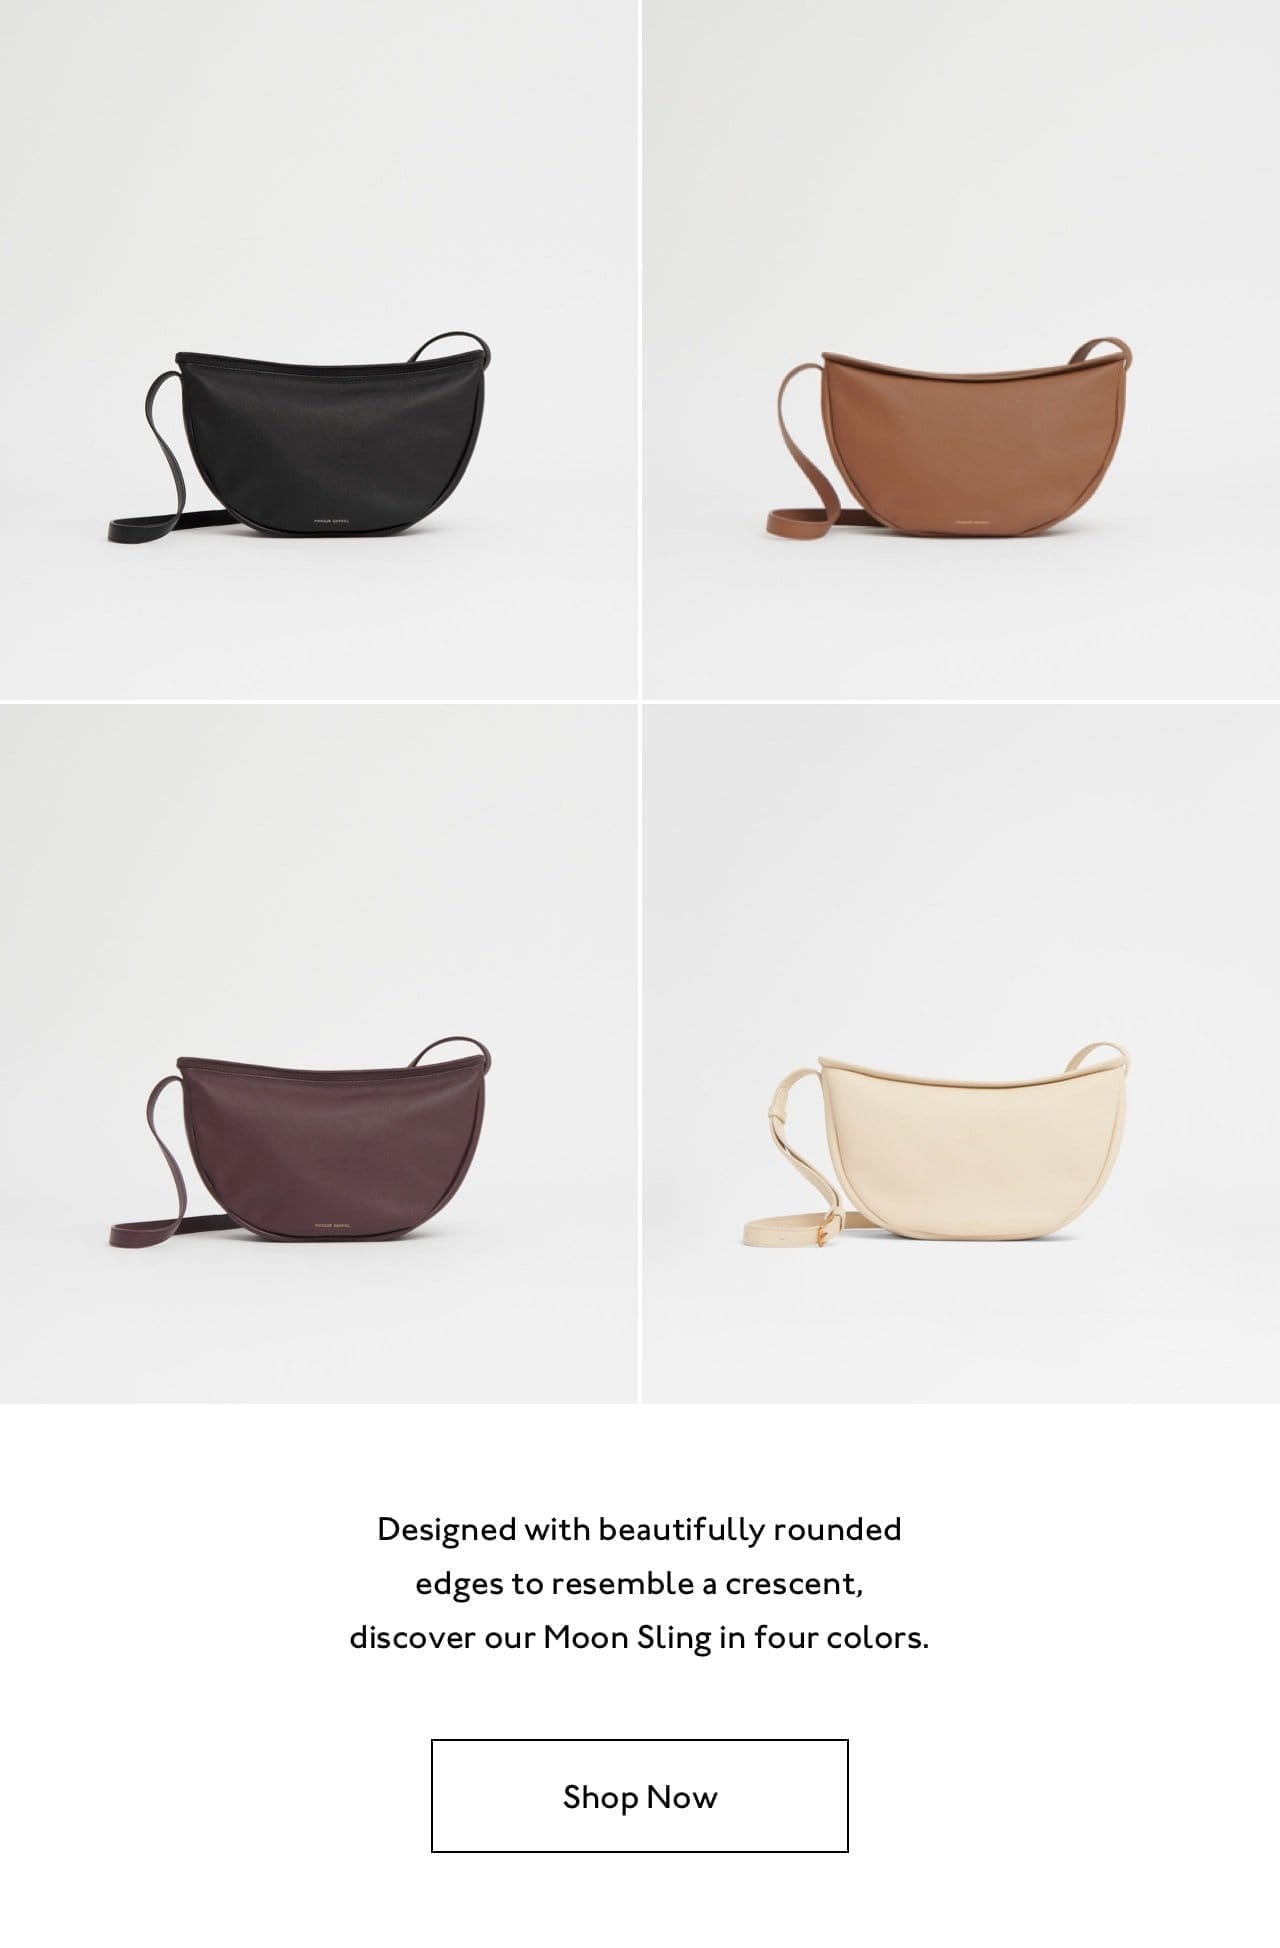 Shop four colors: Desert, Avorio, Plum, and Black. Designed iwth beautifully rounded edges to resemble a crescent, discover our Moon Sling in four colors. Shop now.